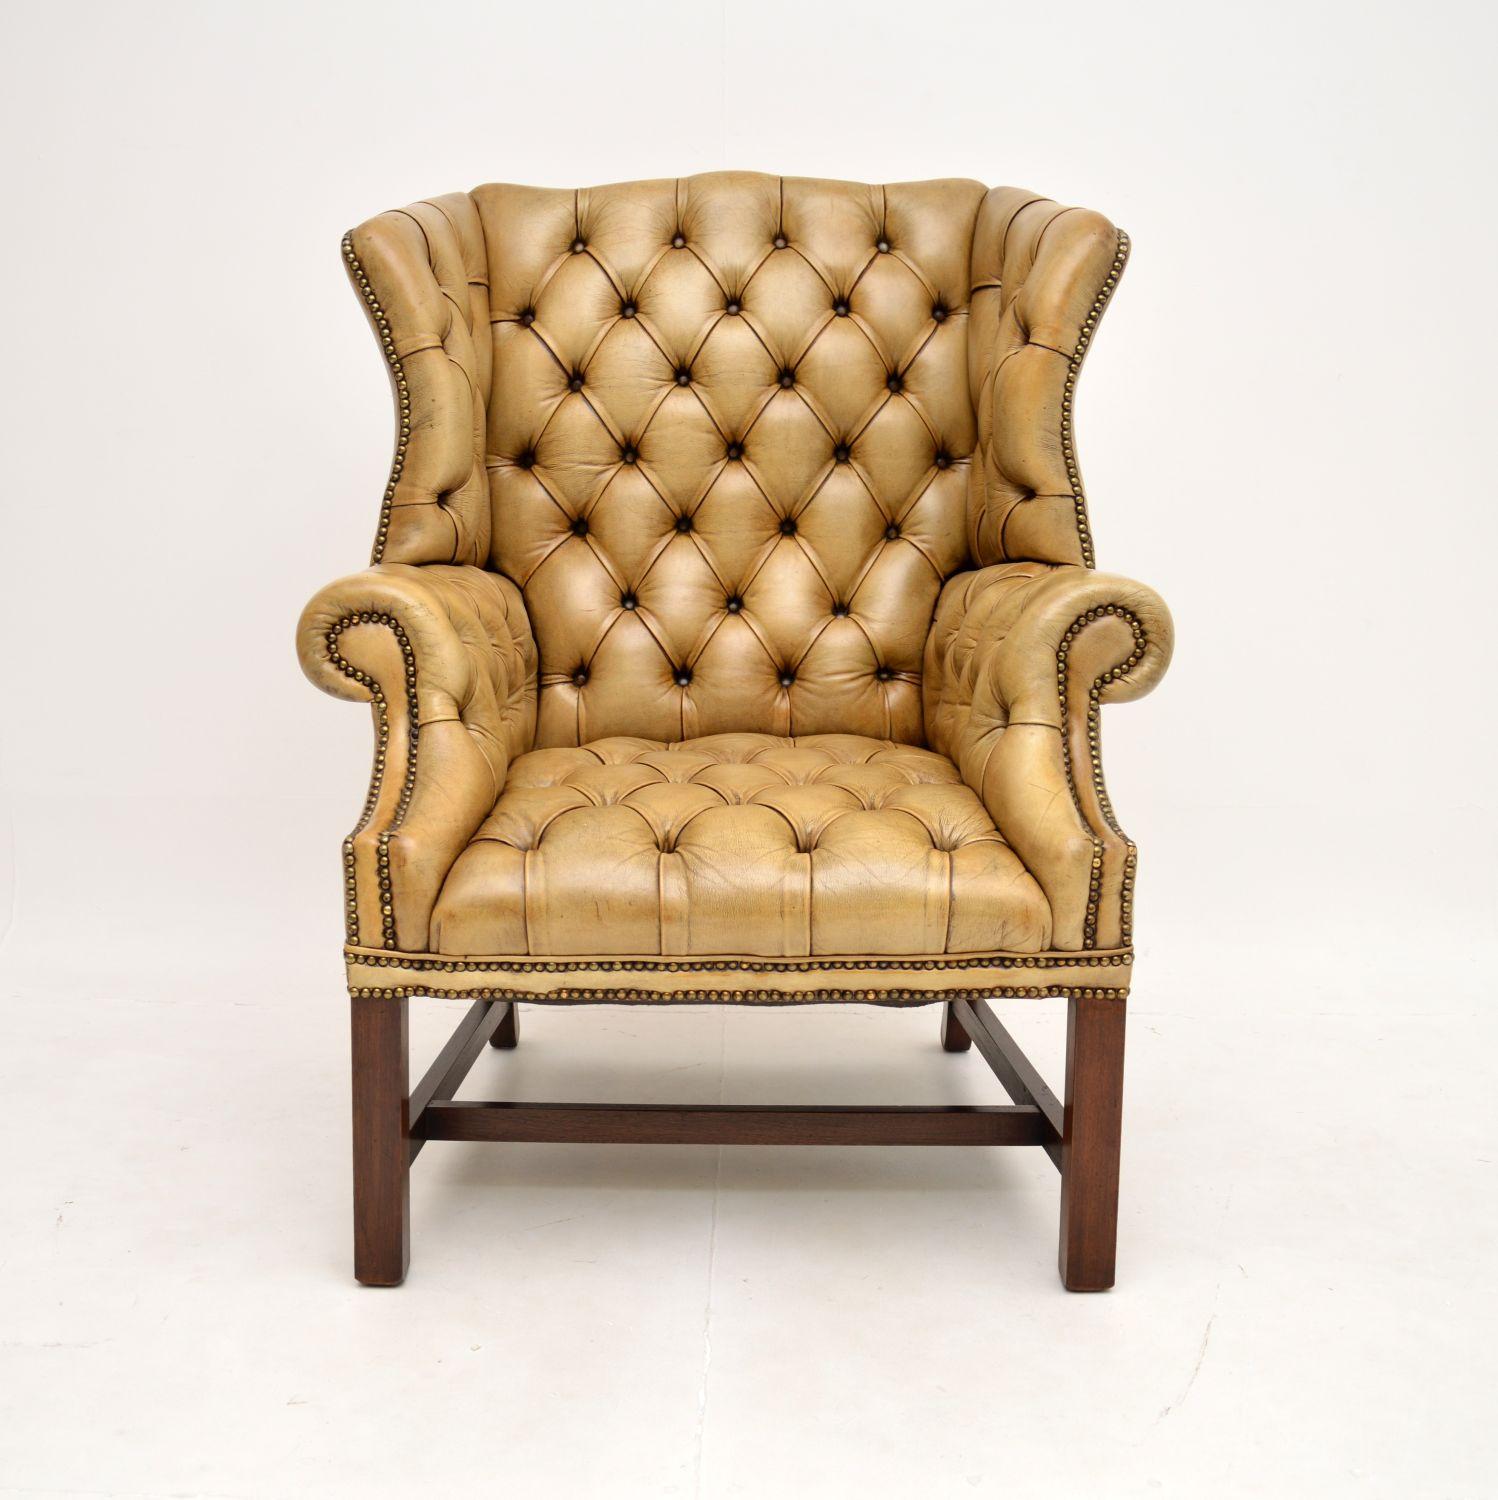 An exceptional antique deep buttoned leather wing back armchair. This was made in England, it dates from around the 1920-30’s.

It is of superb quality, one of the finest examples you could find. It is large and of generous proportions, it is also